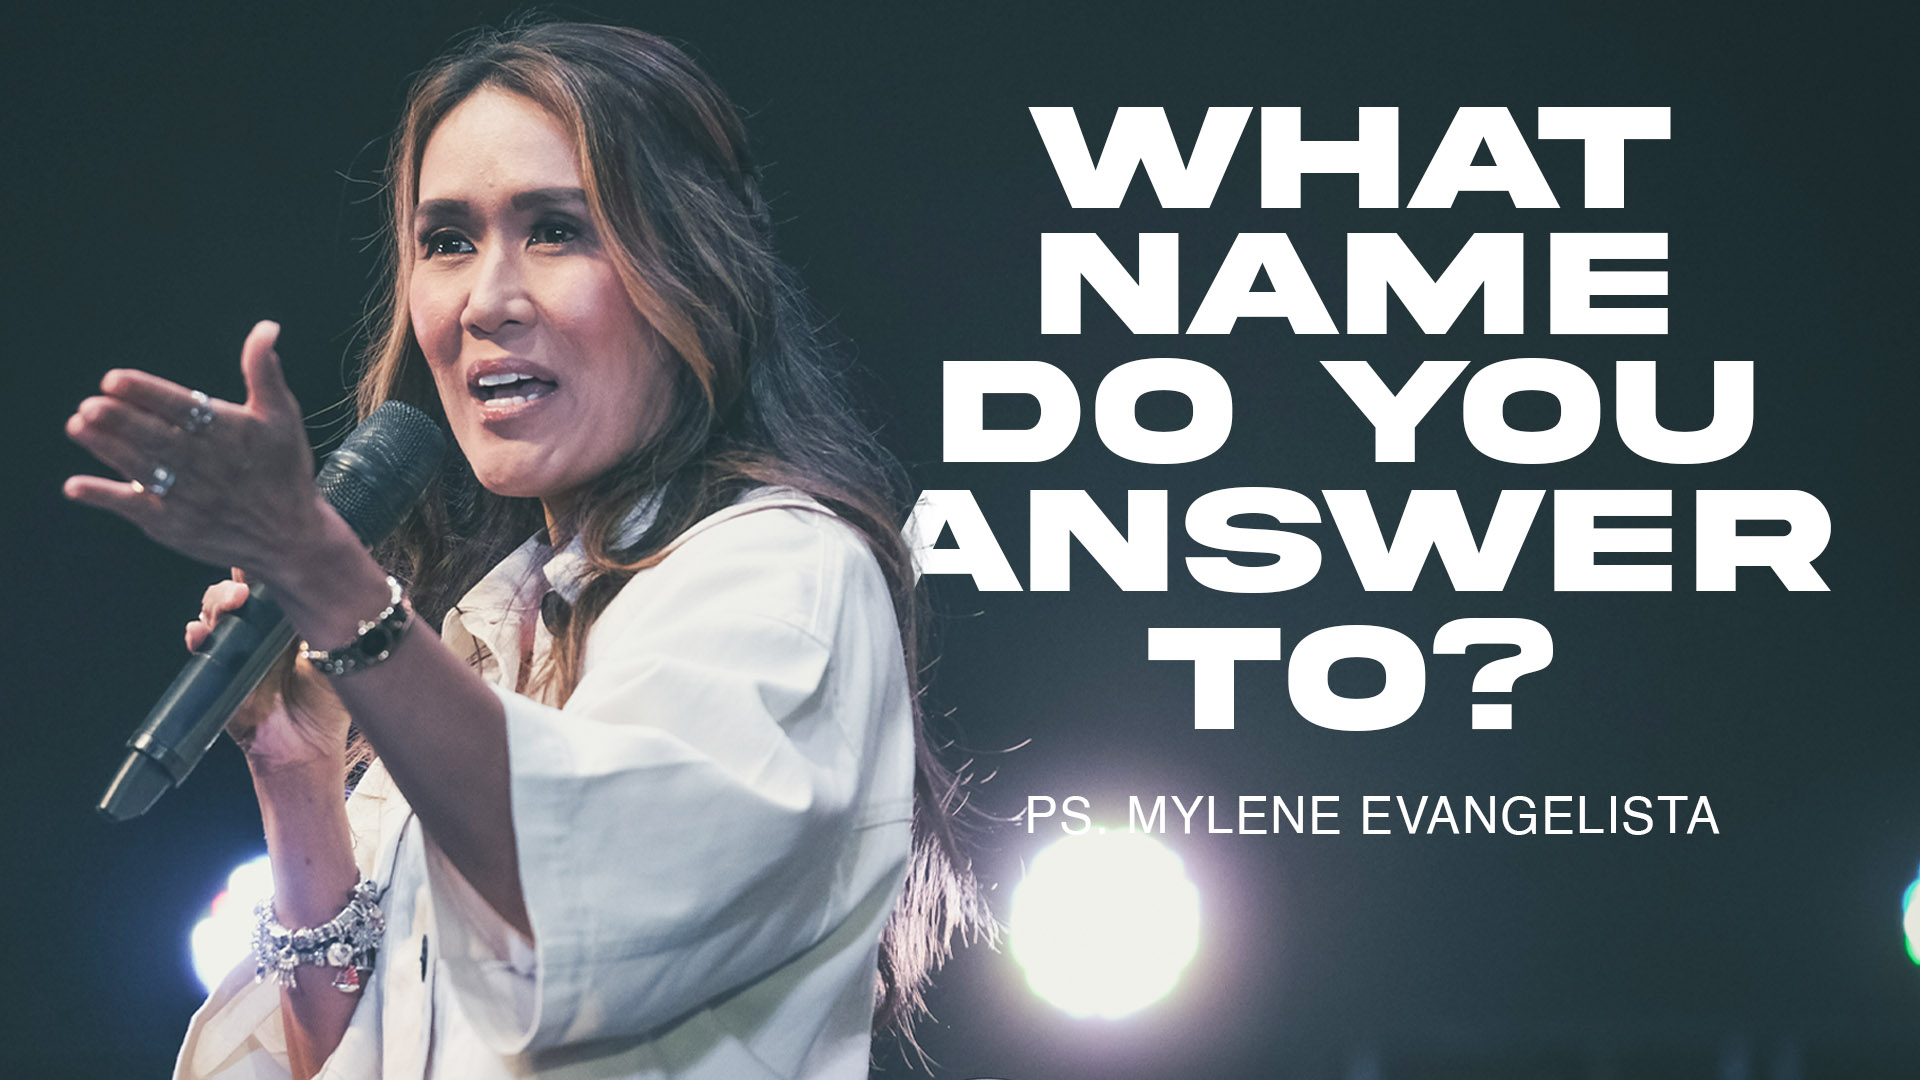 WHAT NAME DO YOU ANSWER TO?